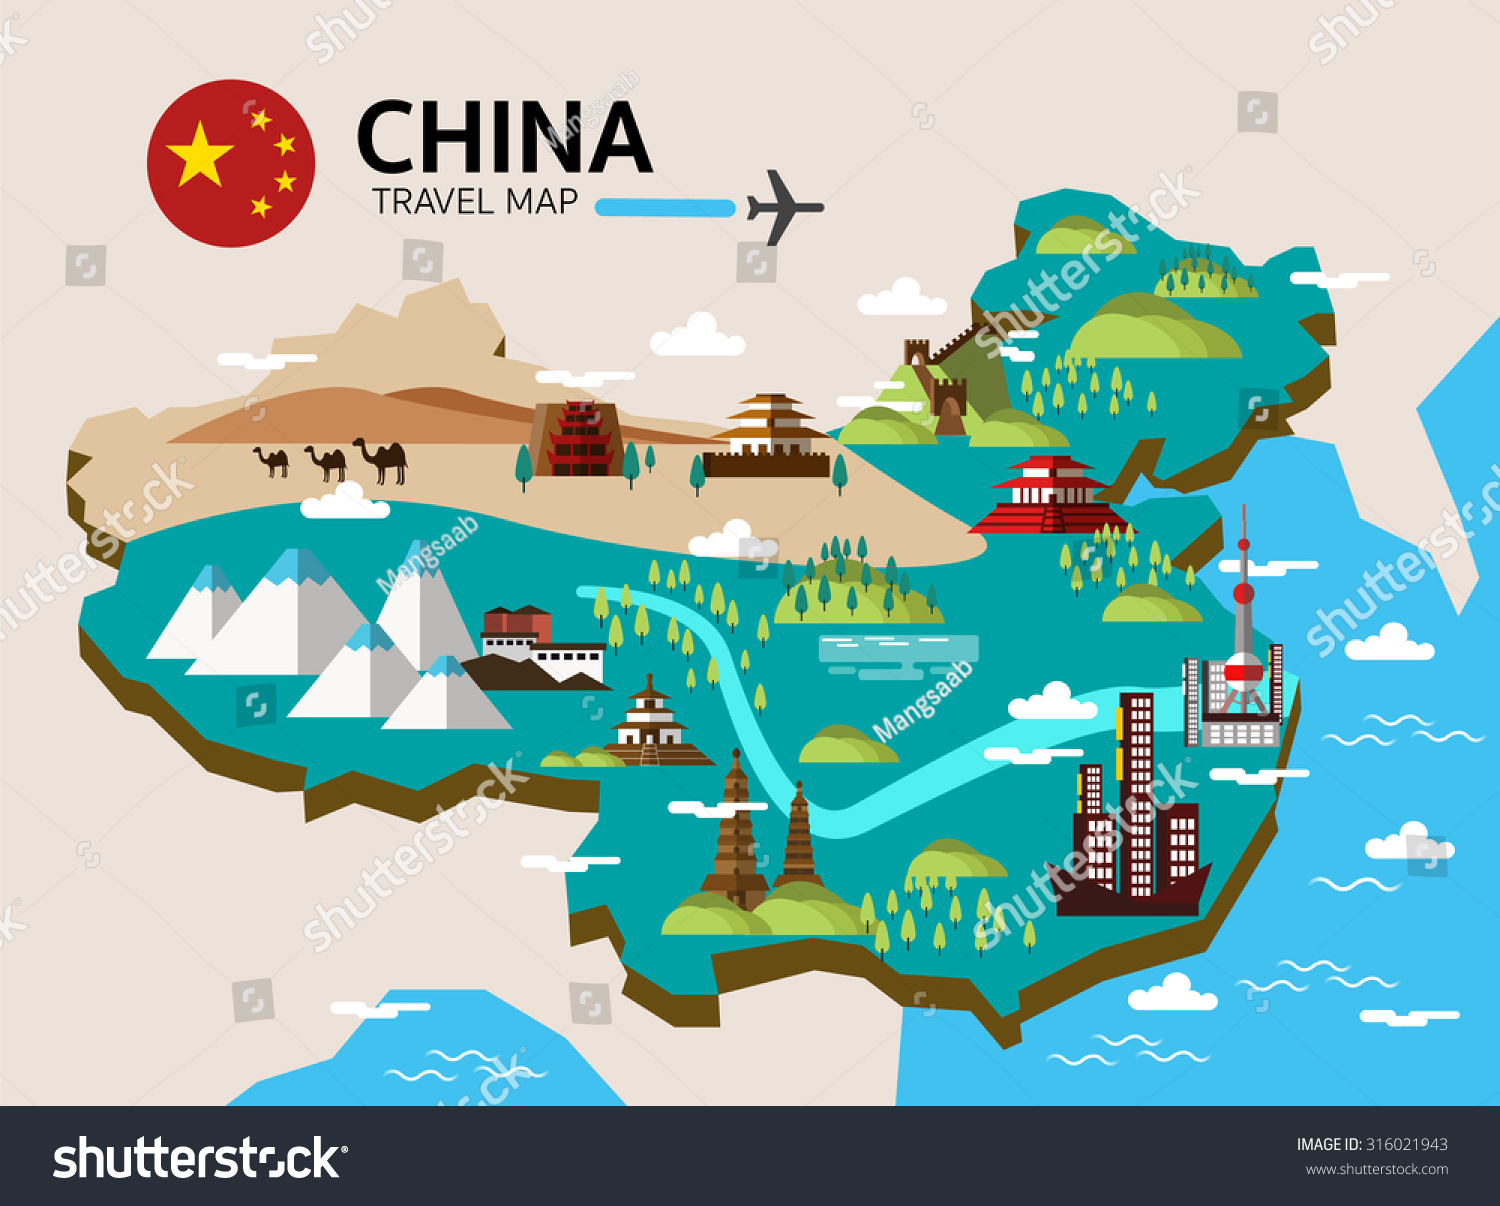 China Landmark And Travel Map. Flat Design Elements And Icons. Vector ...